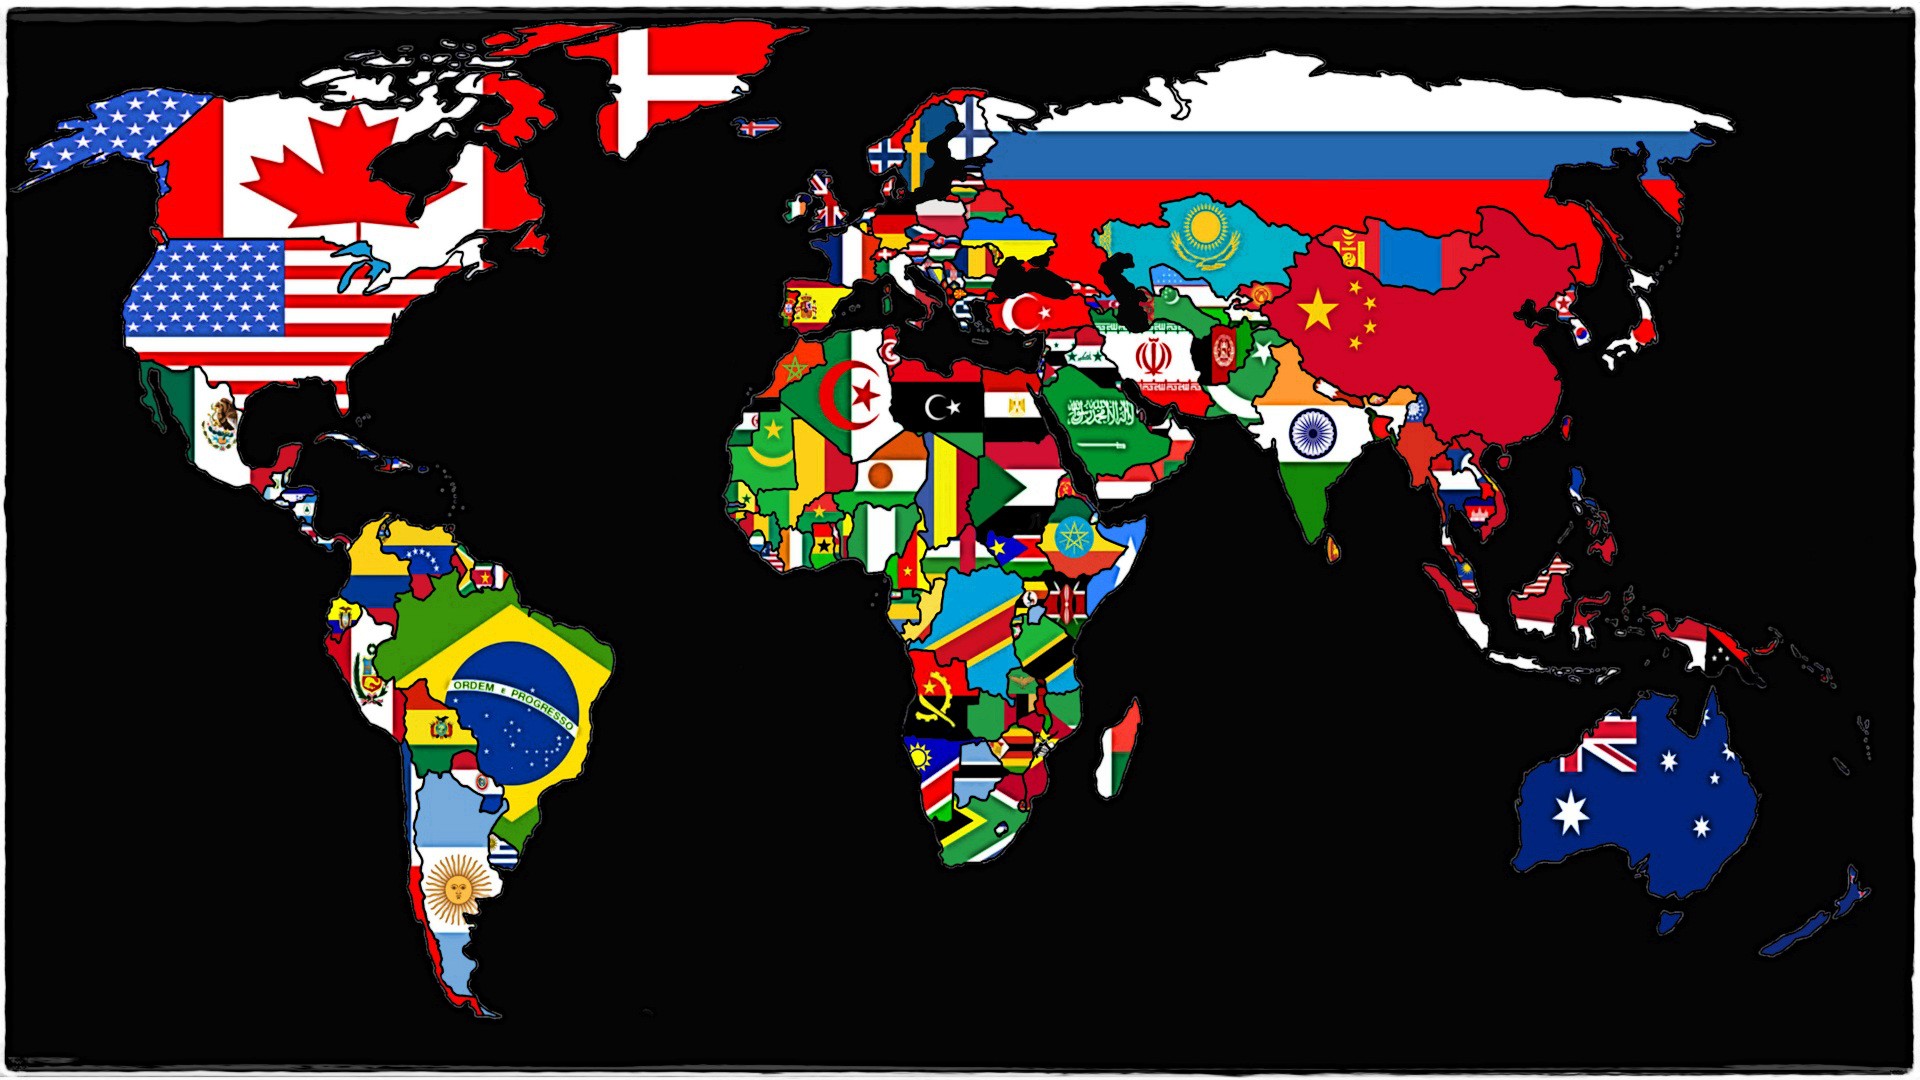 General 1920x1080 world map flag map wrong borders